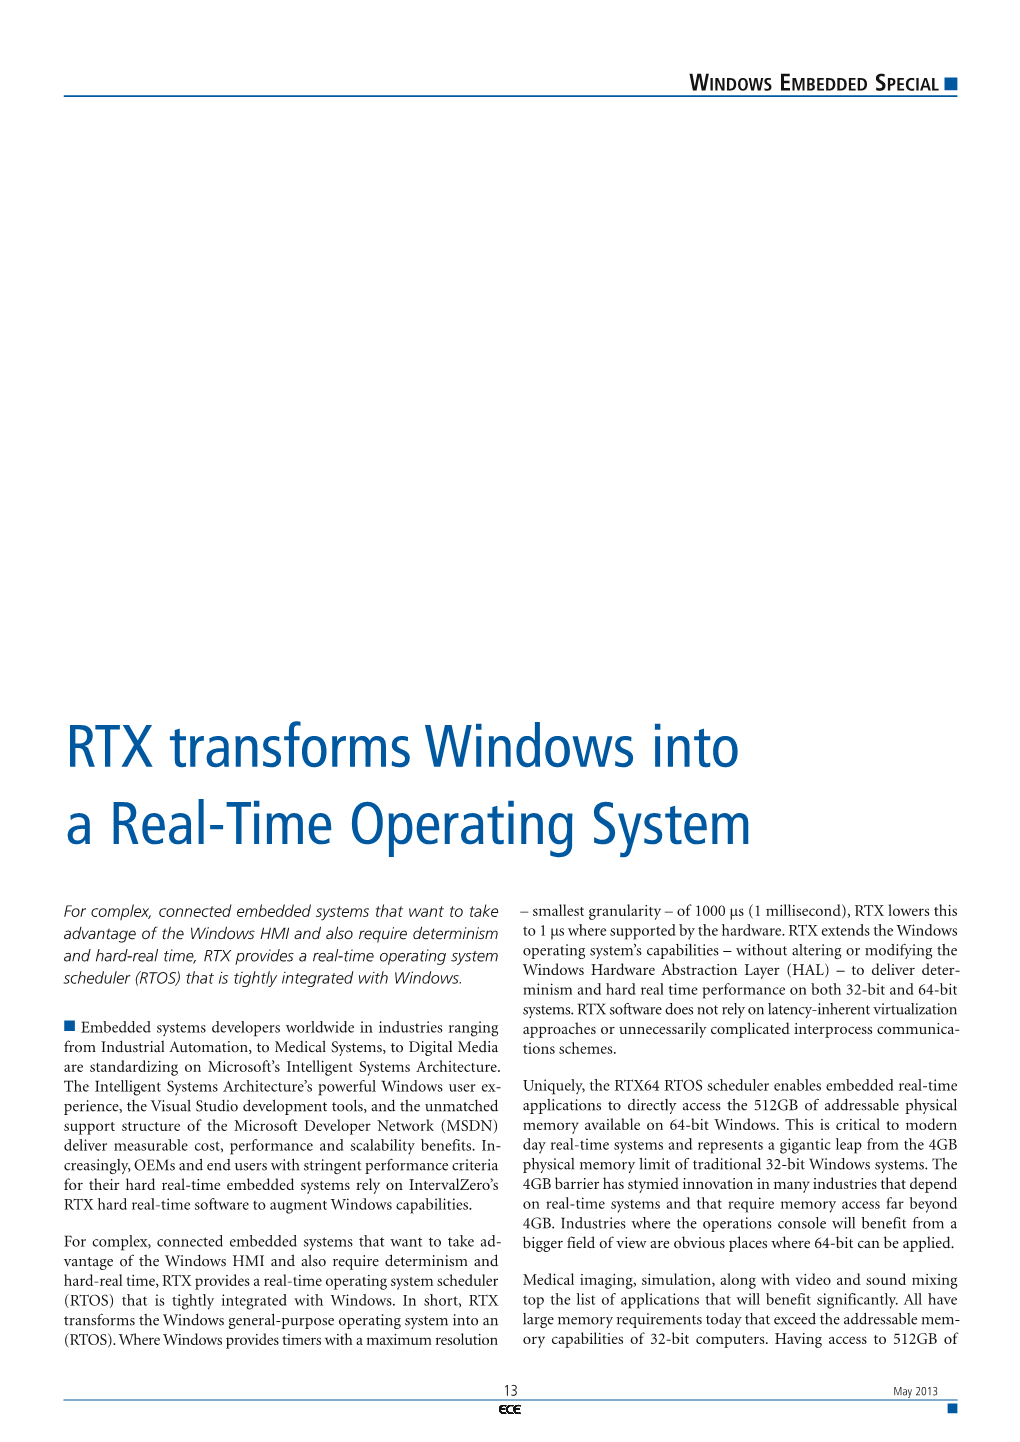 RTX Transforms Windows Into a Real-Time Operating System